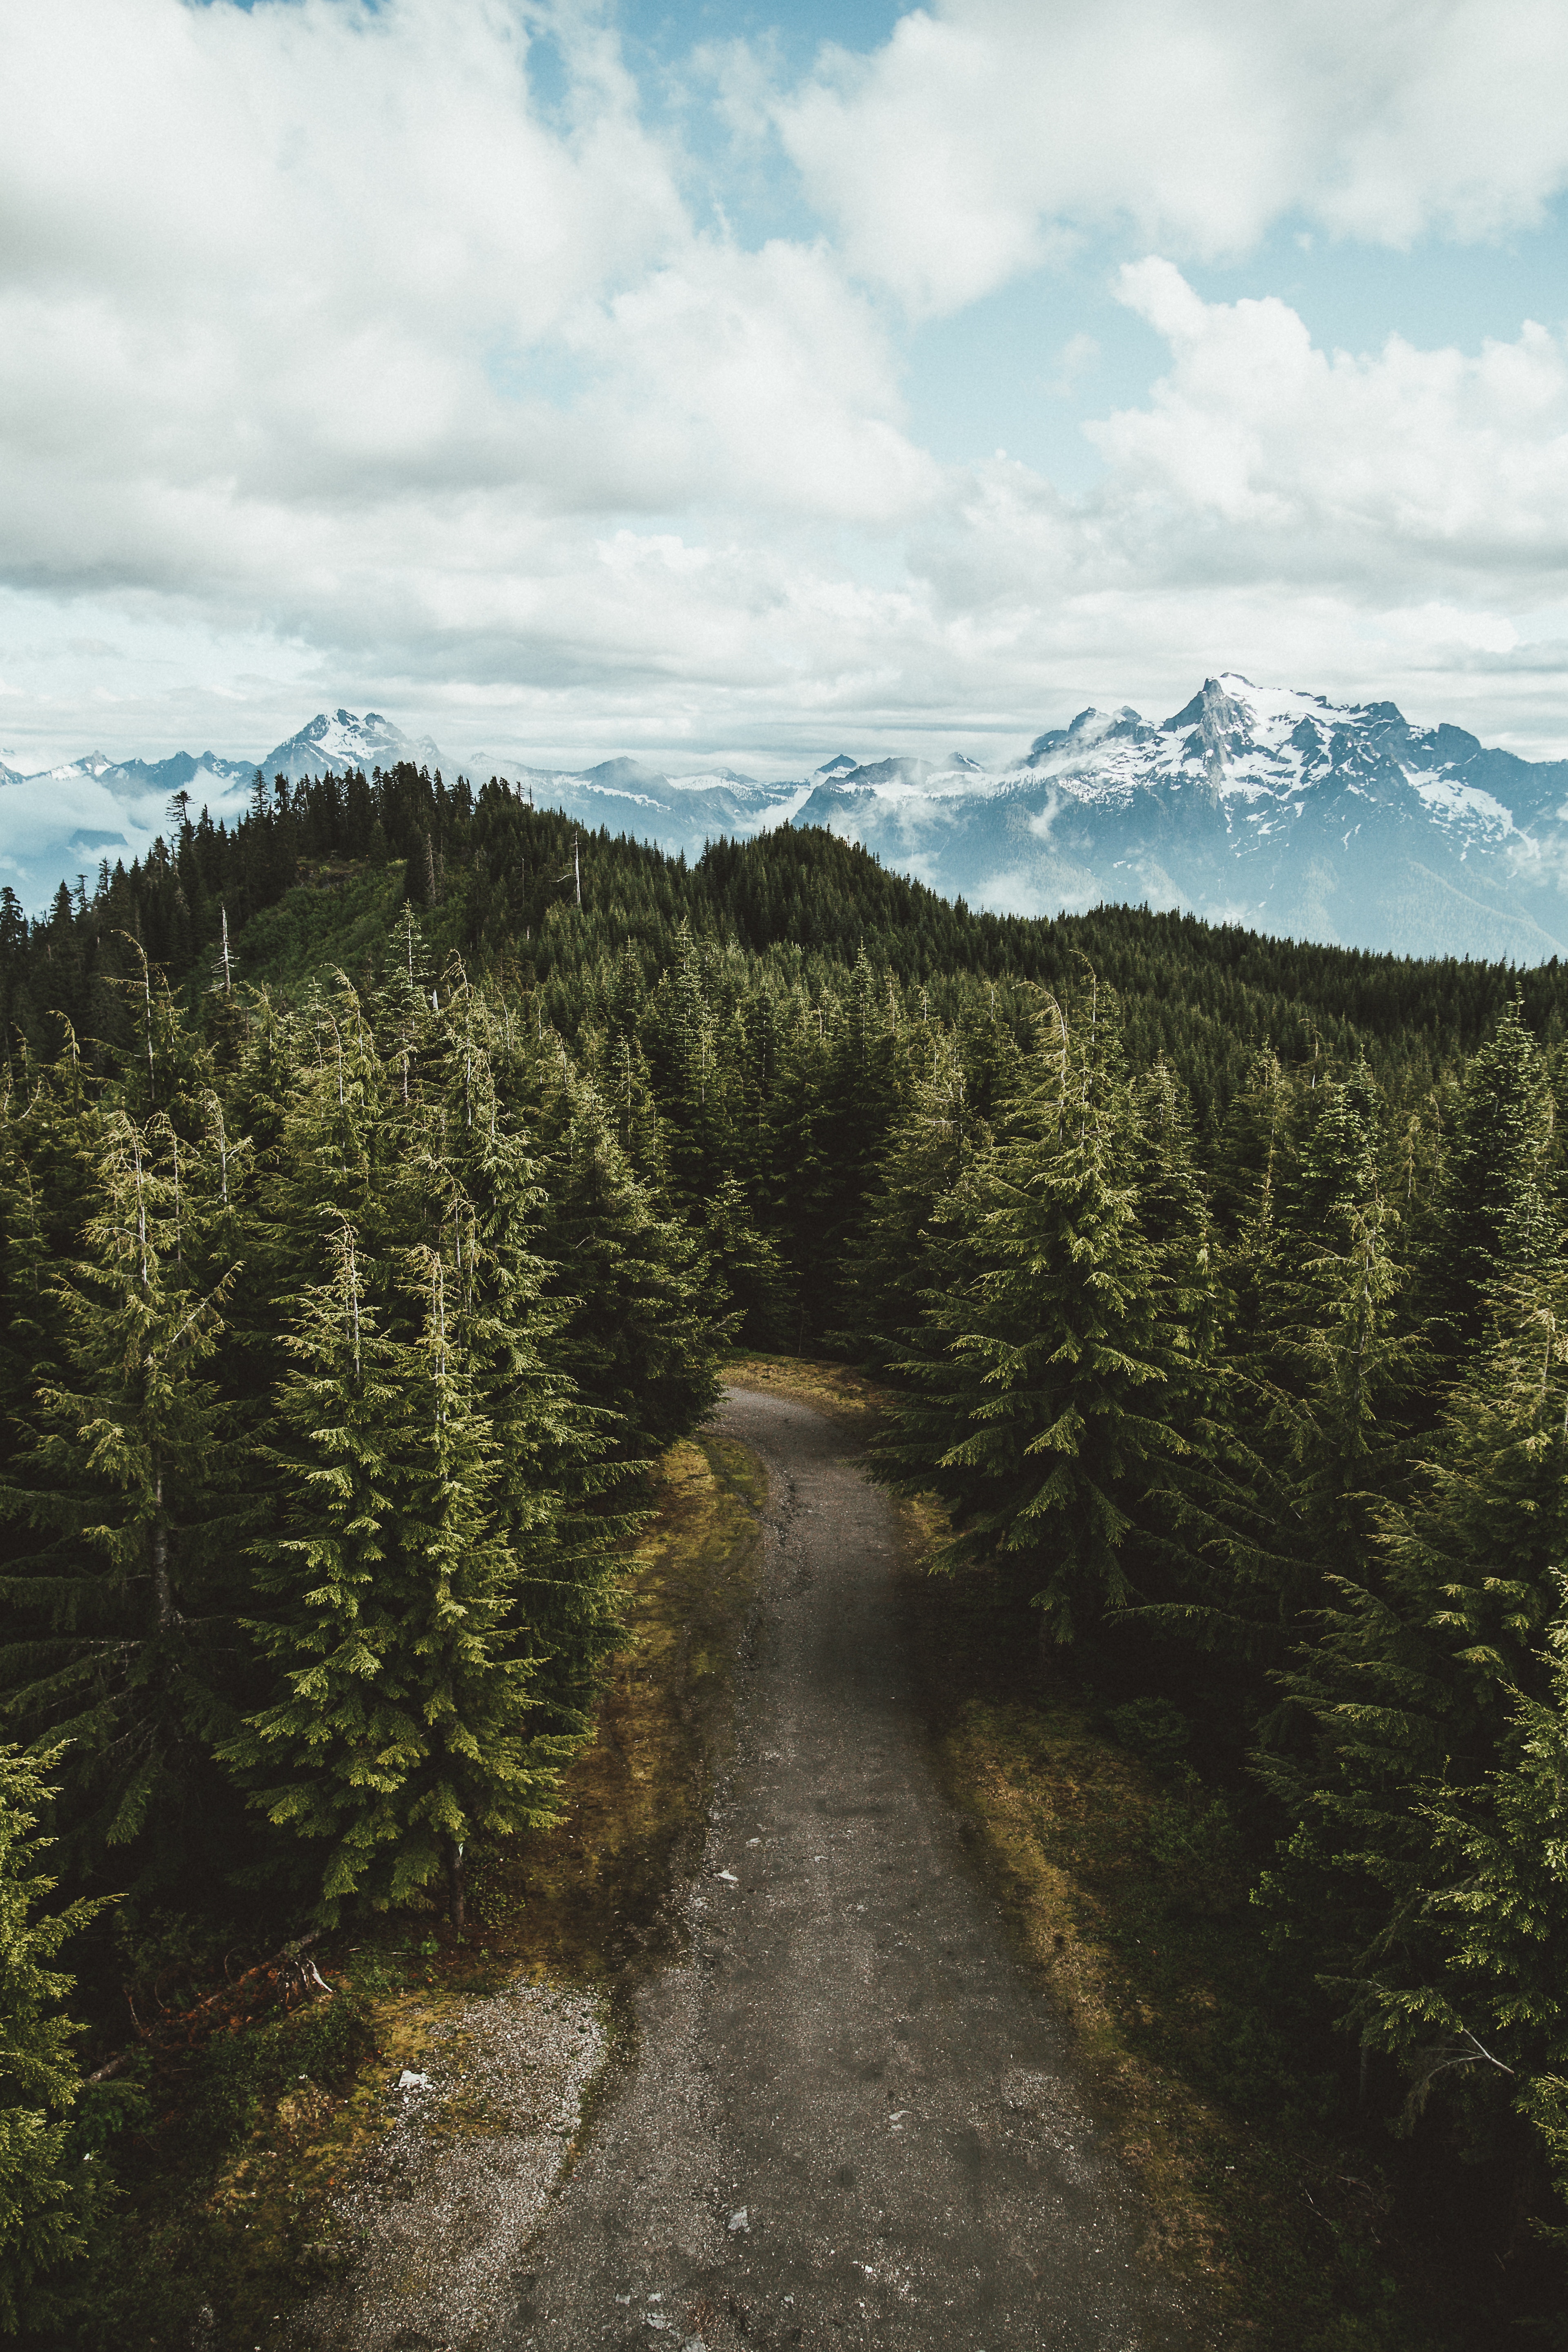 usa, landscape, nature, trees, sky, mountains, view from above, road, united states, darrington lock screen backgrounds